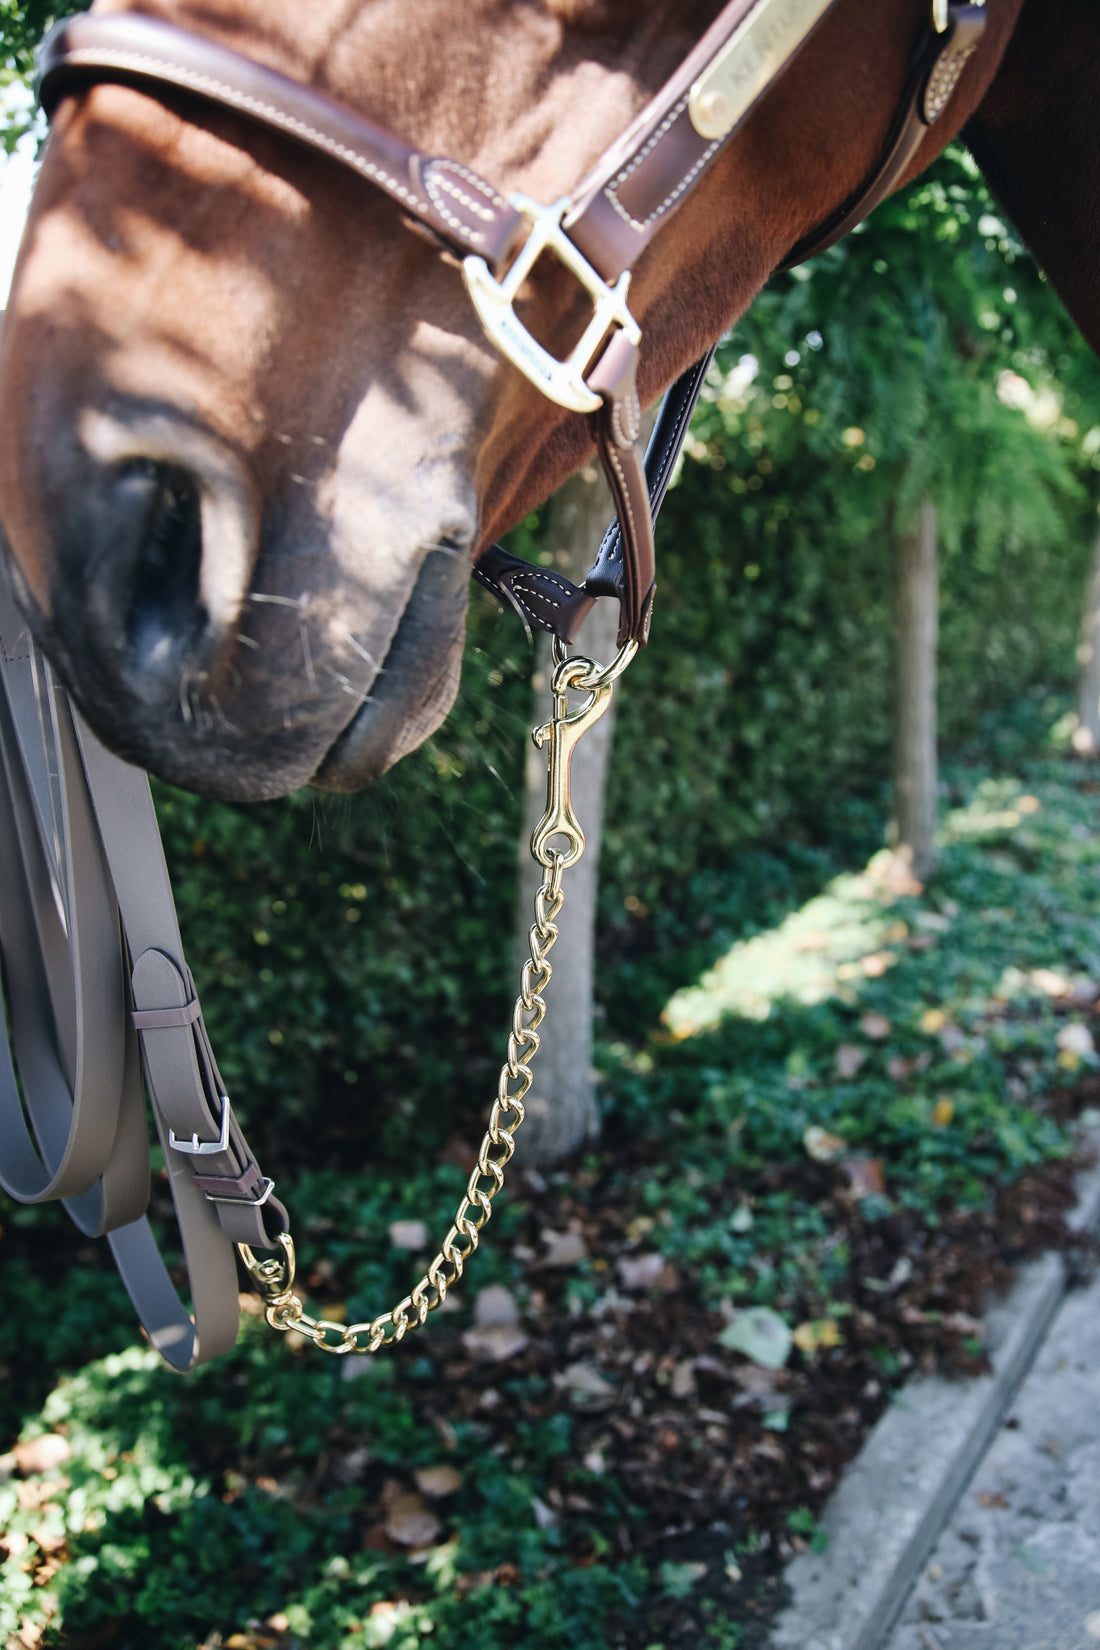 The Kentucky stallion chain is 60cm and finished in gold. This product offers more control when handling a stallion or a horse with a lot of character.